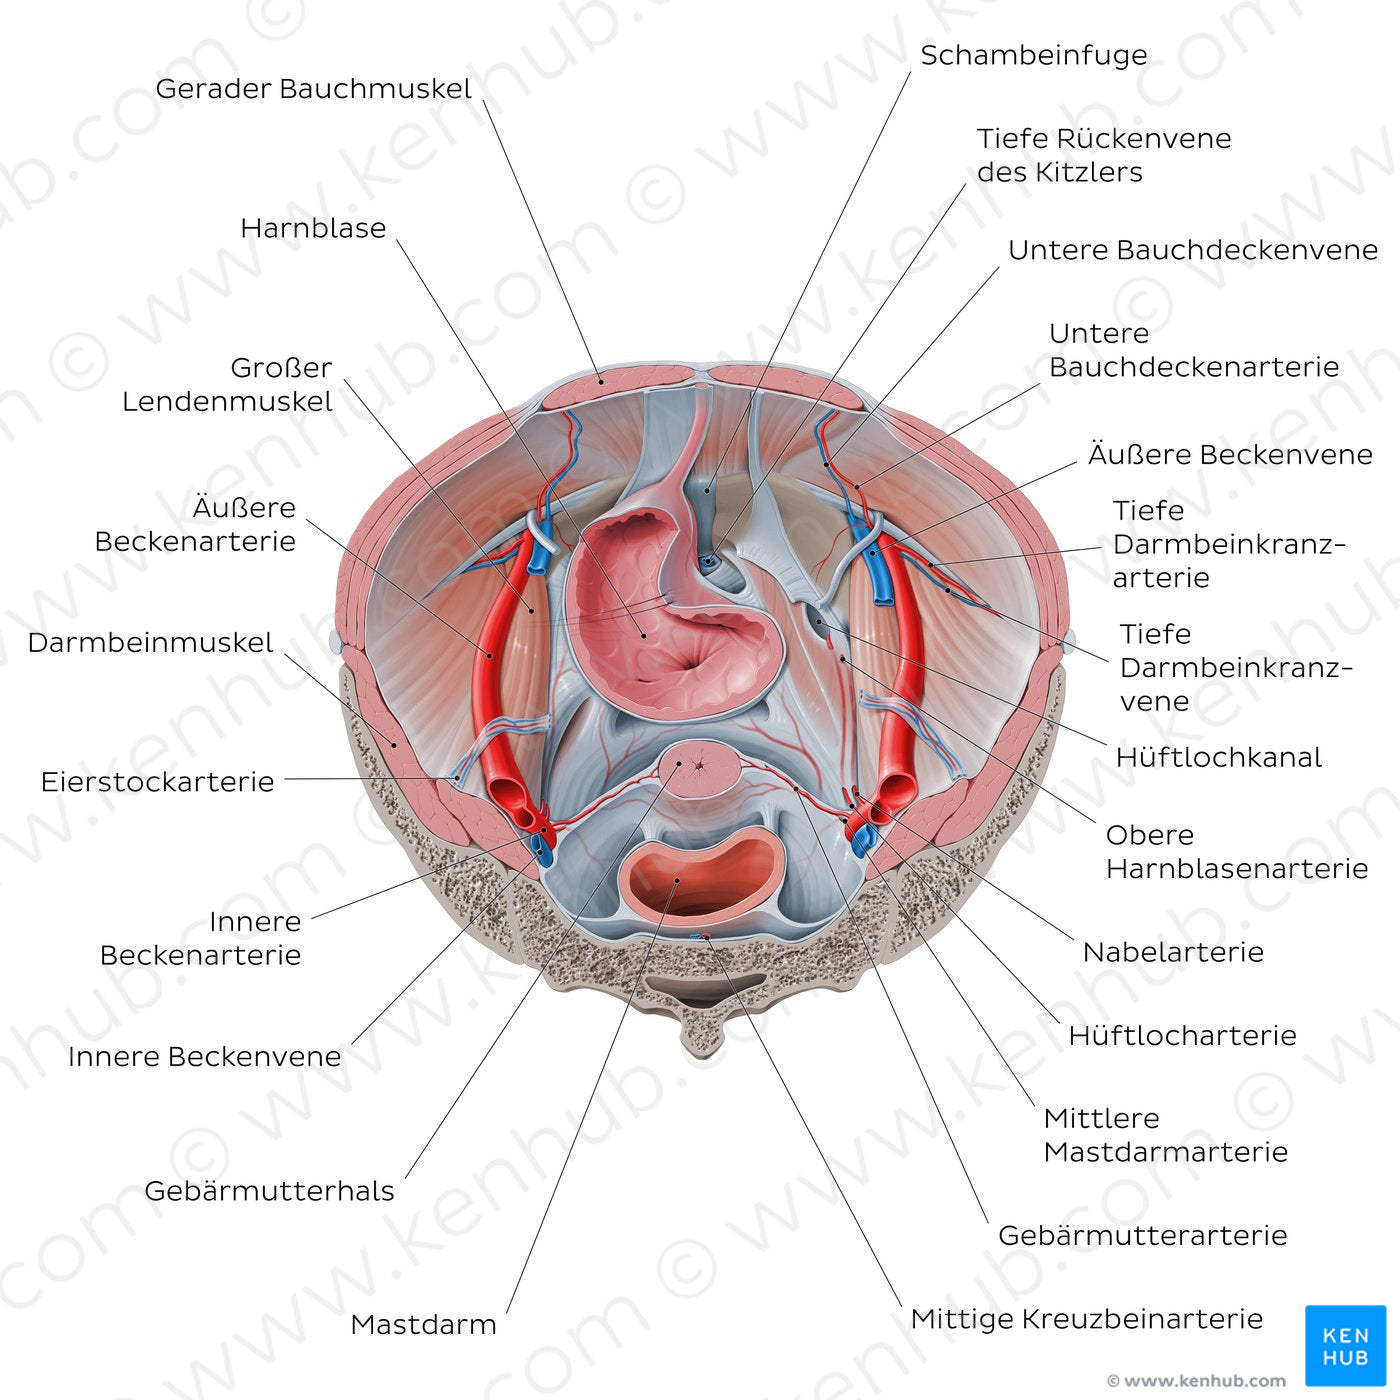 Superior view of the female pelvis: Organs and vessels (German)